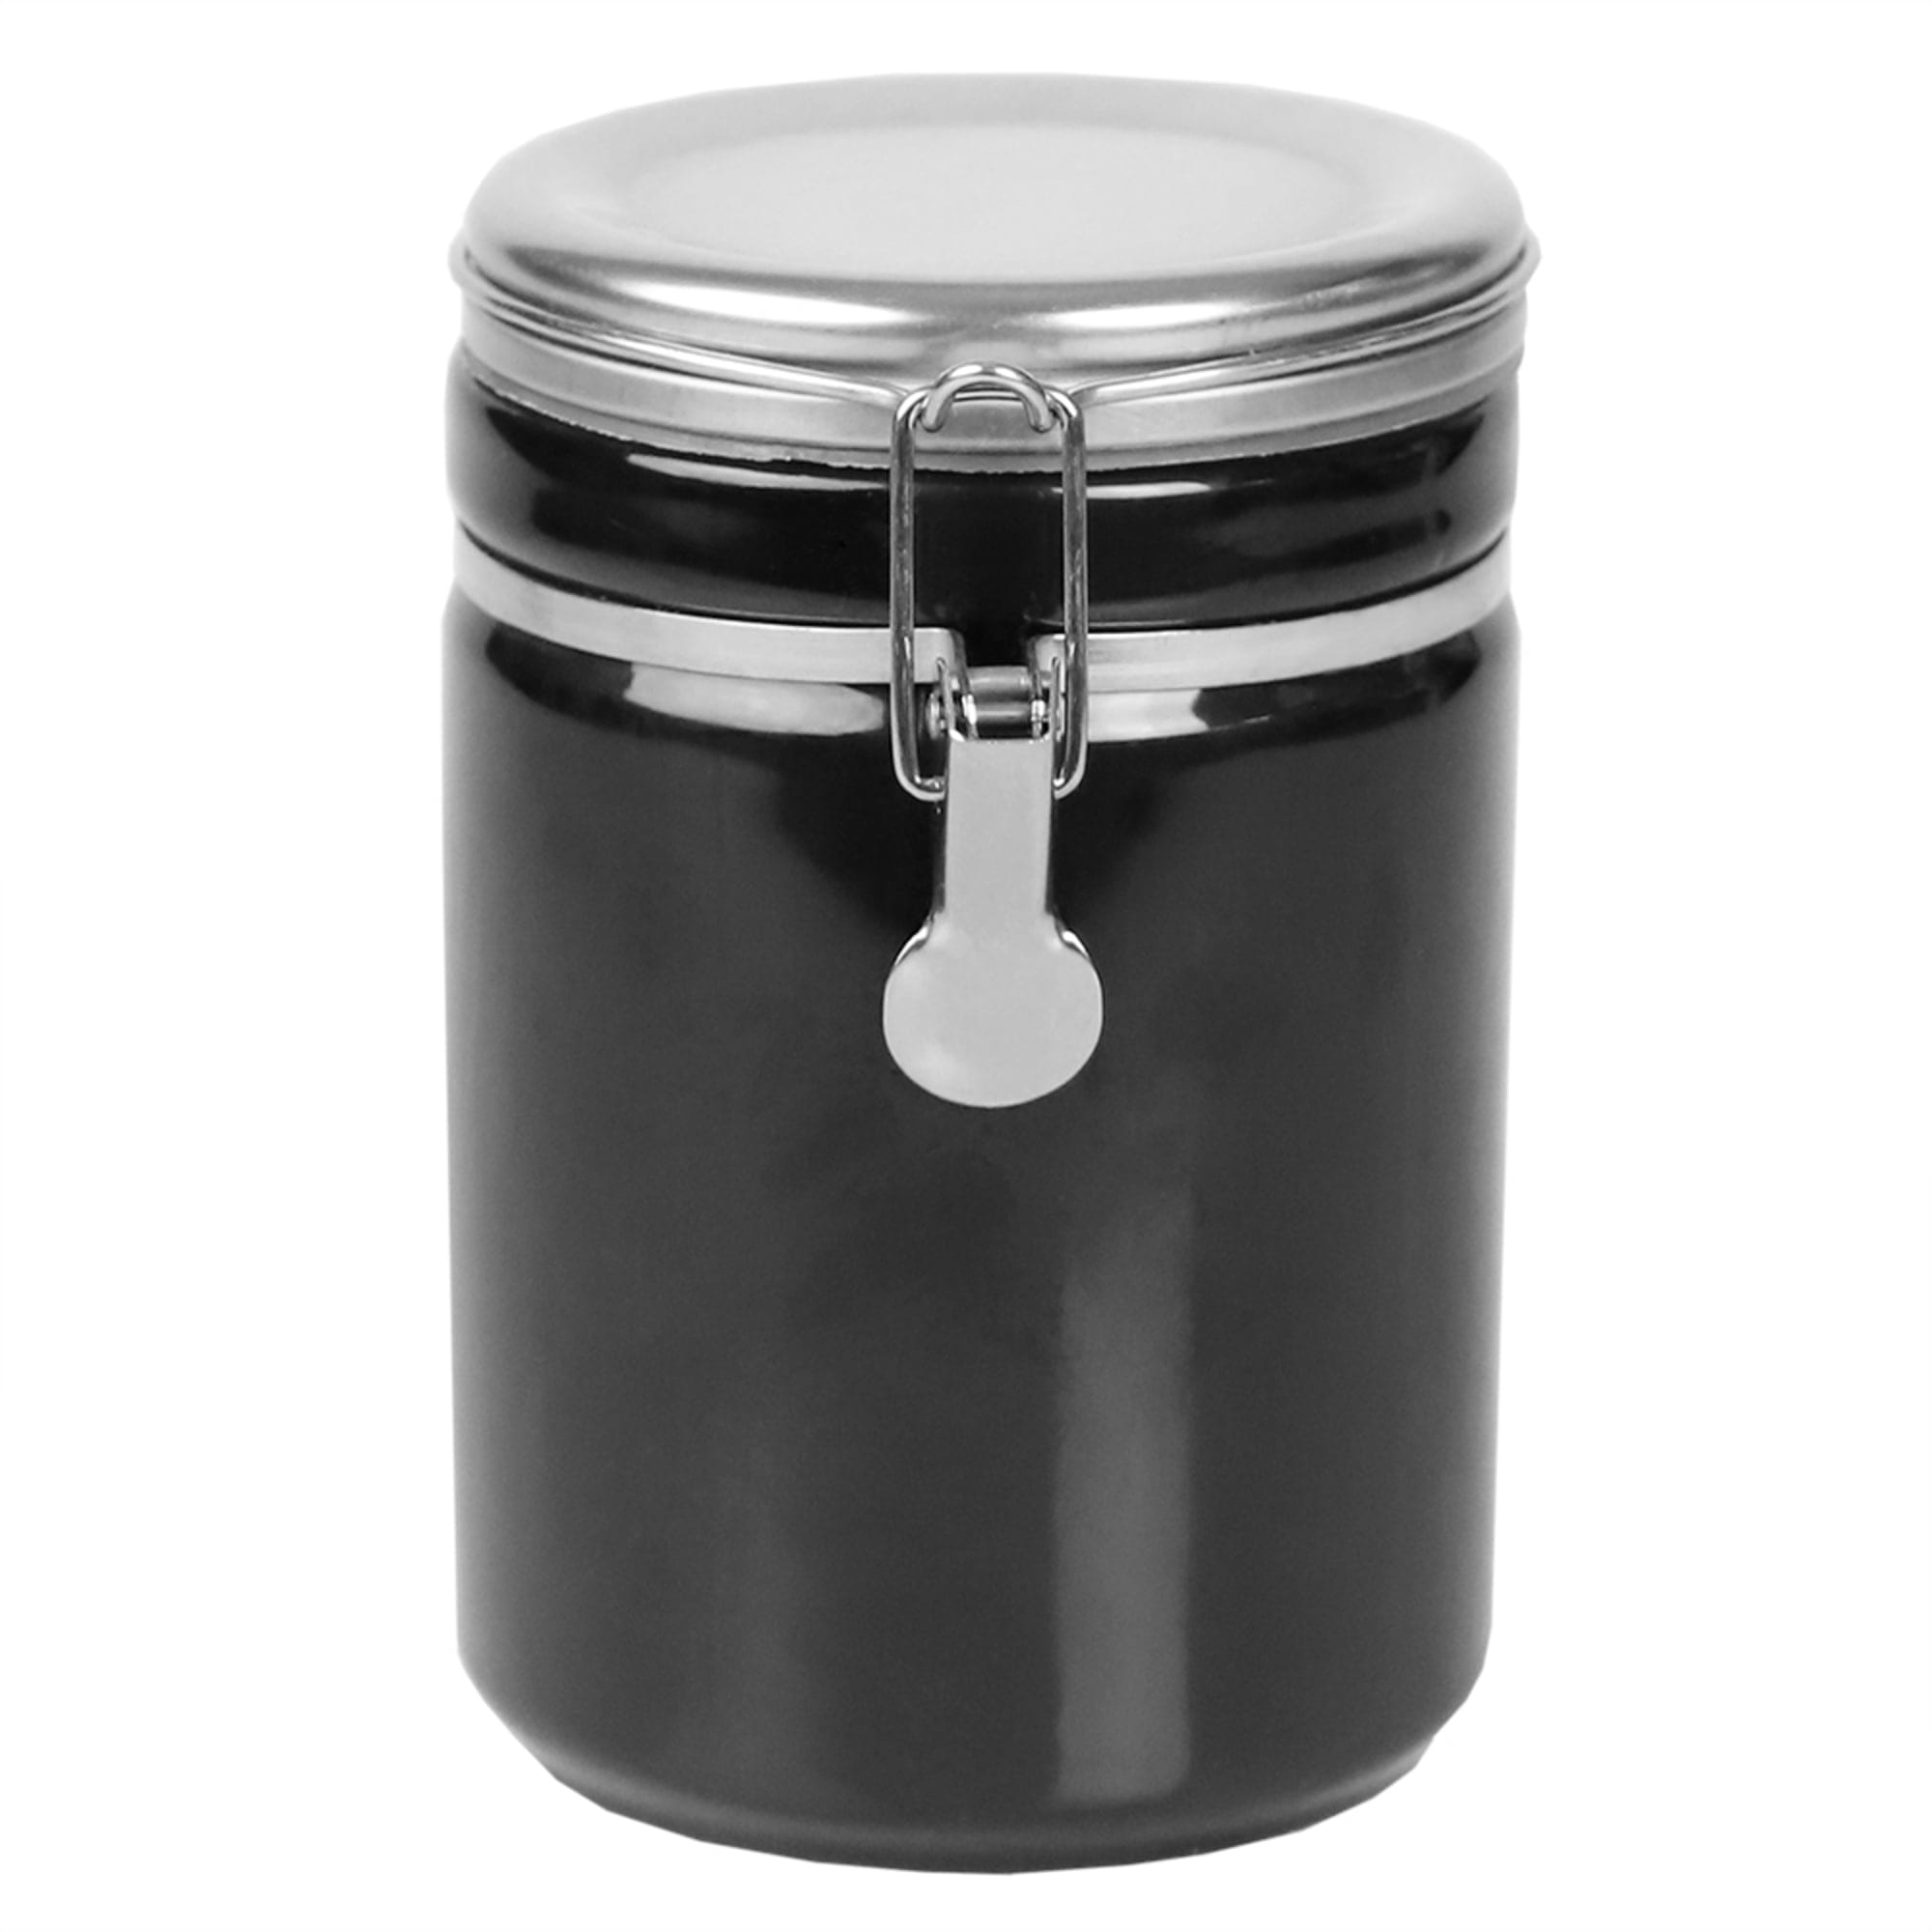 Home Basics 40 oz. Canister with Stainless Steel Top, Black $7.00 EACH, CASE PACK OF 8